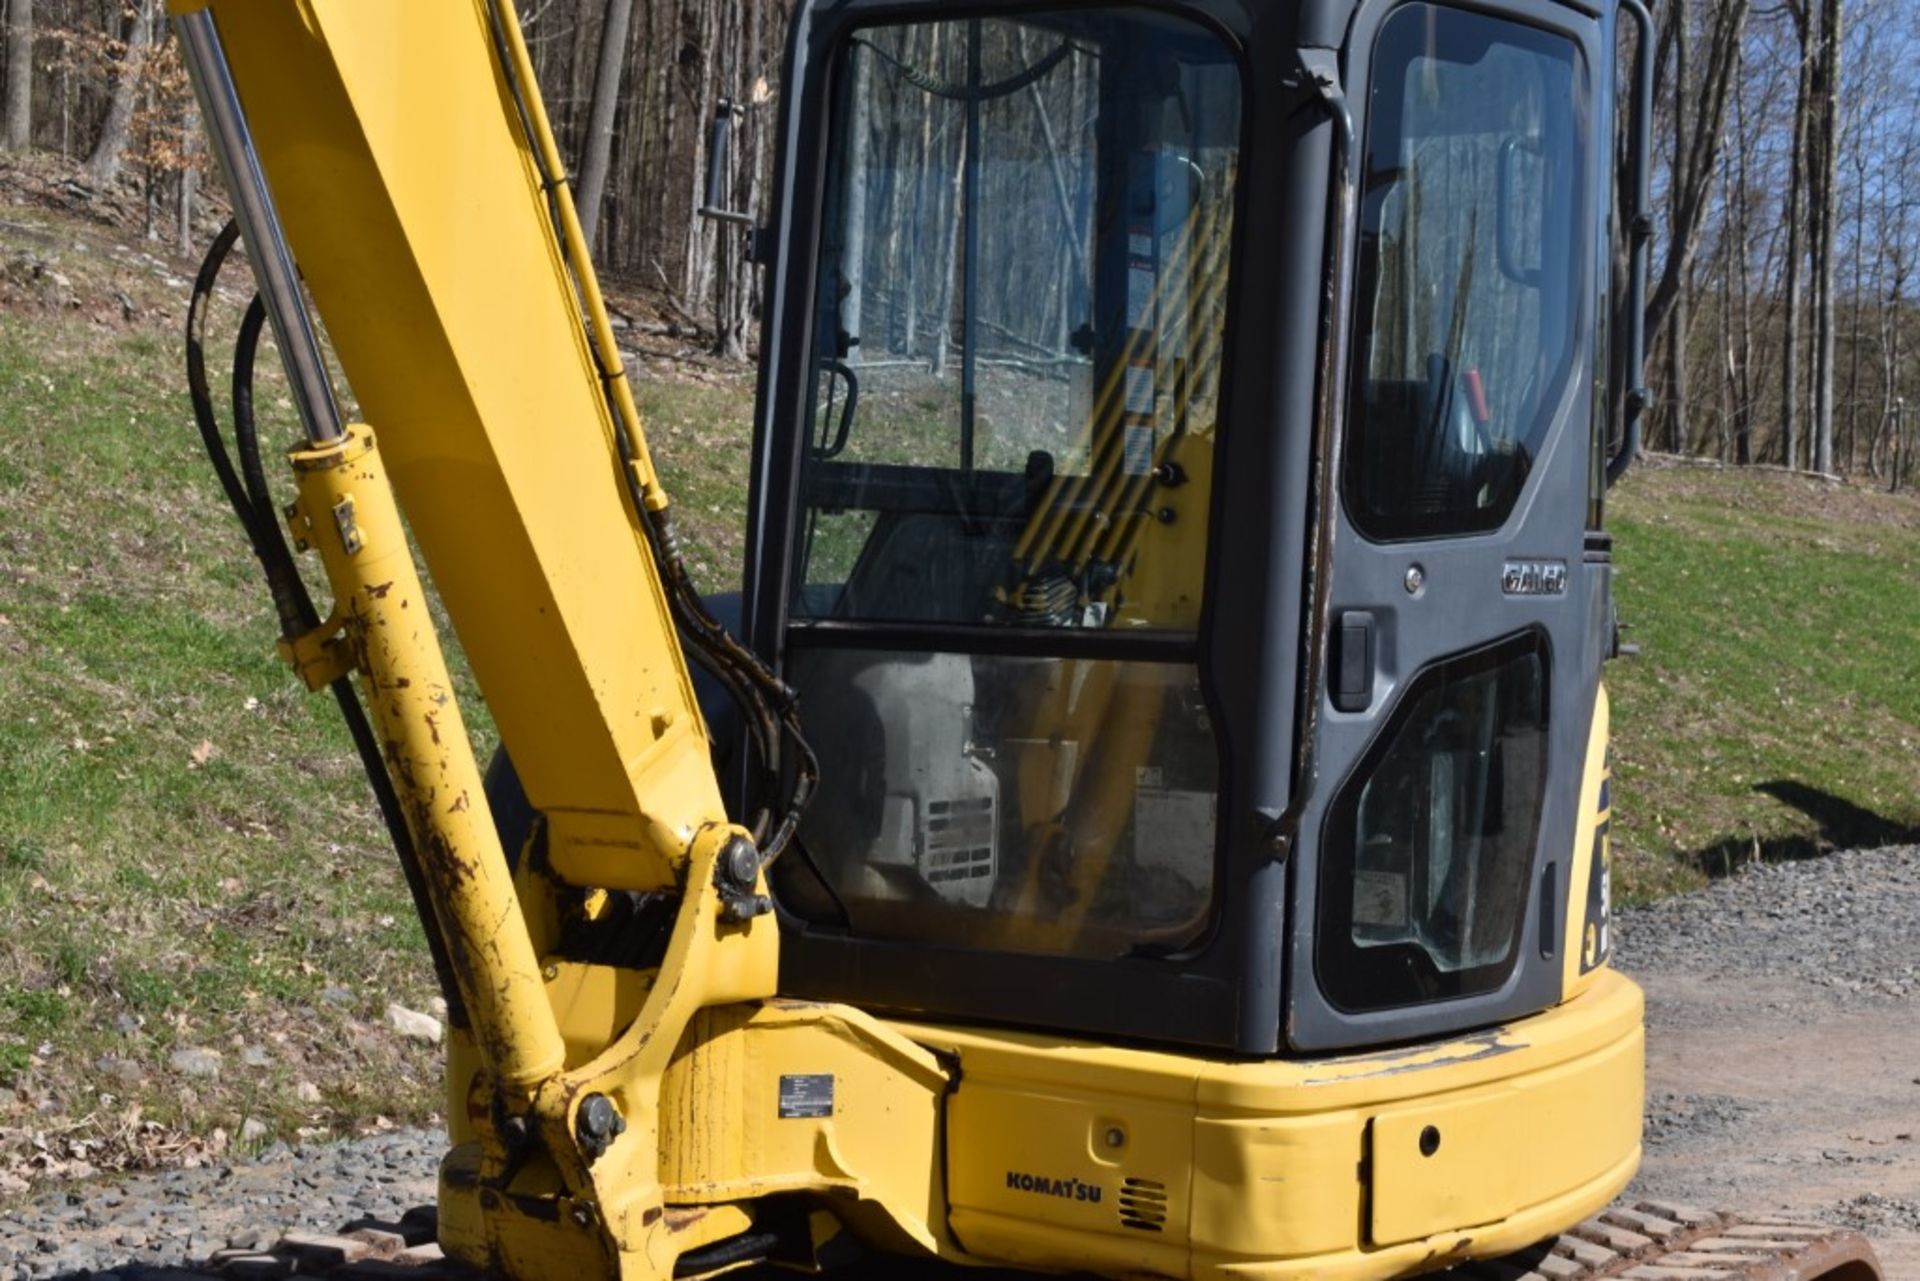 Komatsu PC50MR-2 Excavator 6643 Hours, Runs and Operates, WB 24" Bucket, WB Quick Coupler, Auxiliary - Image 5 of 44